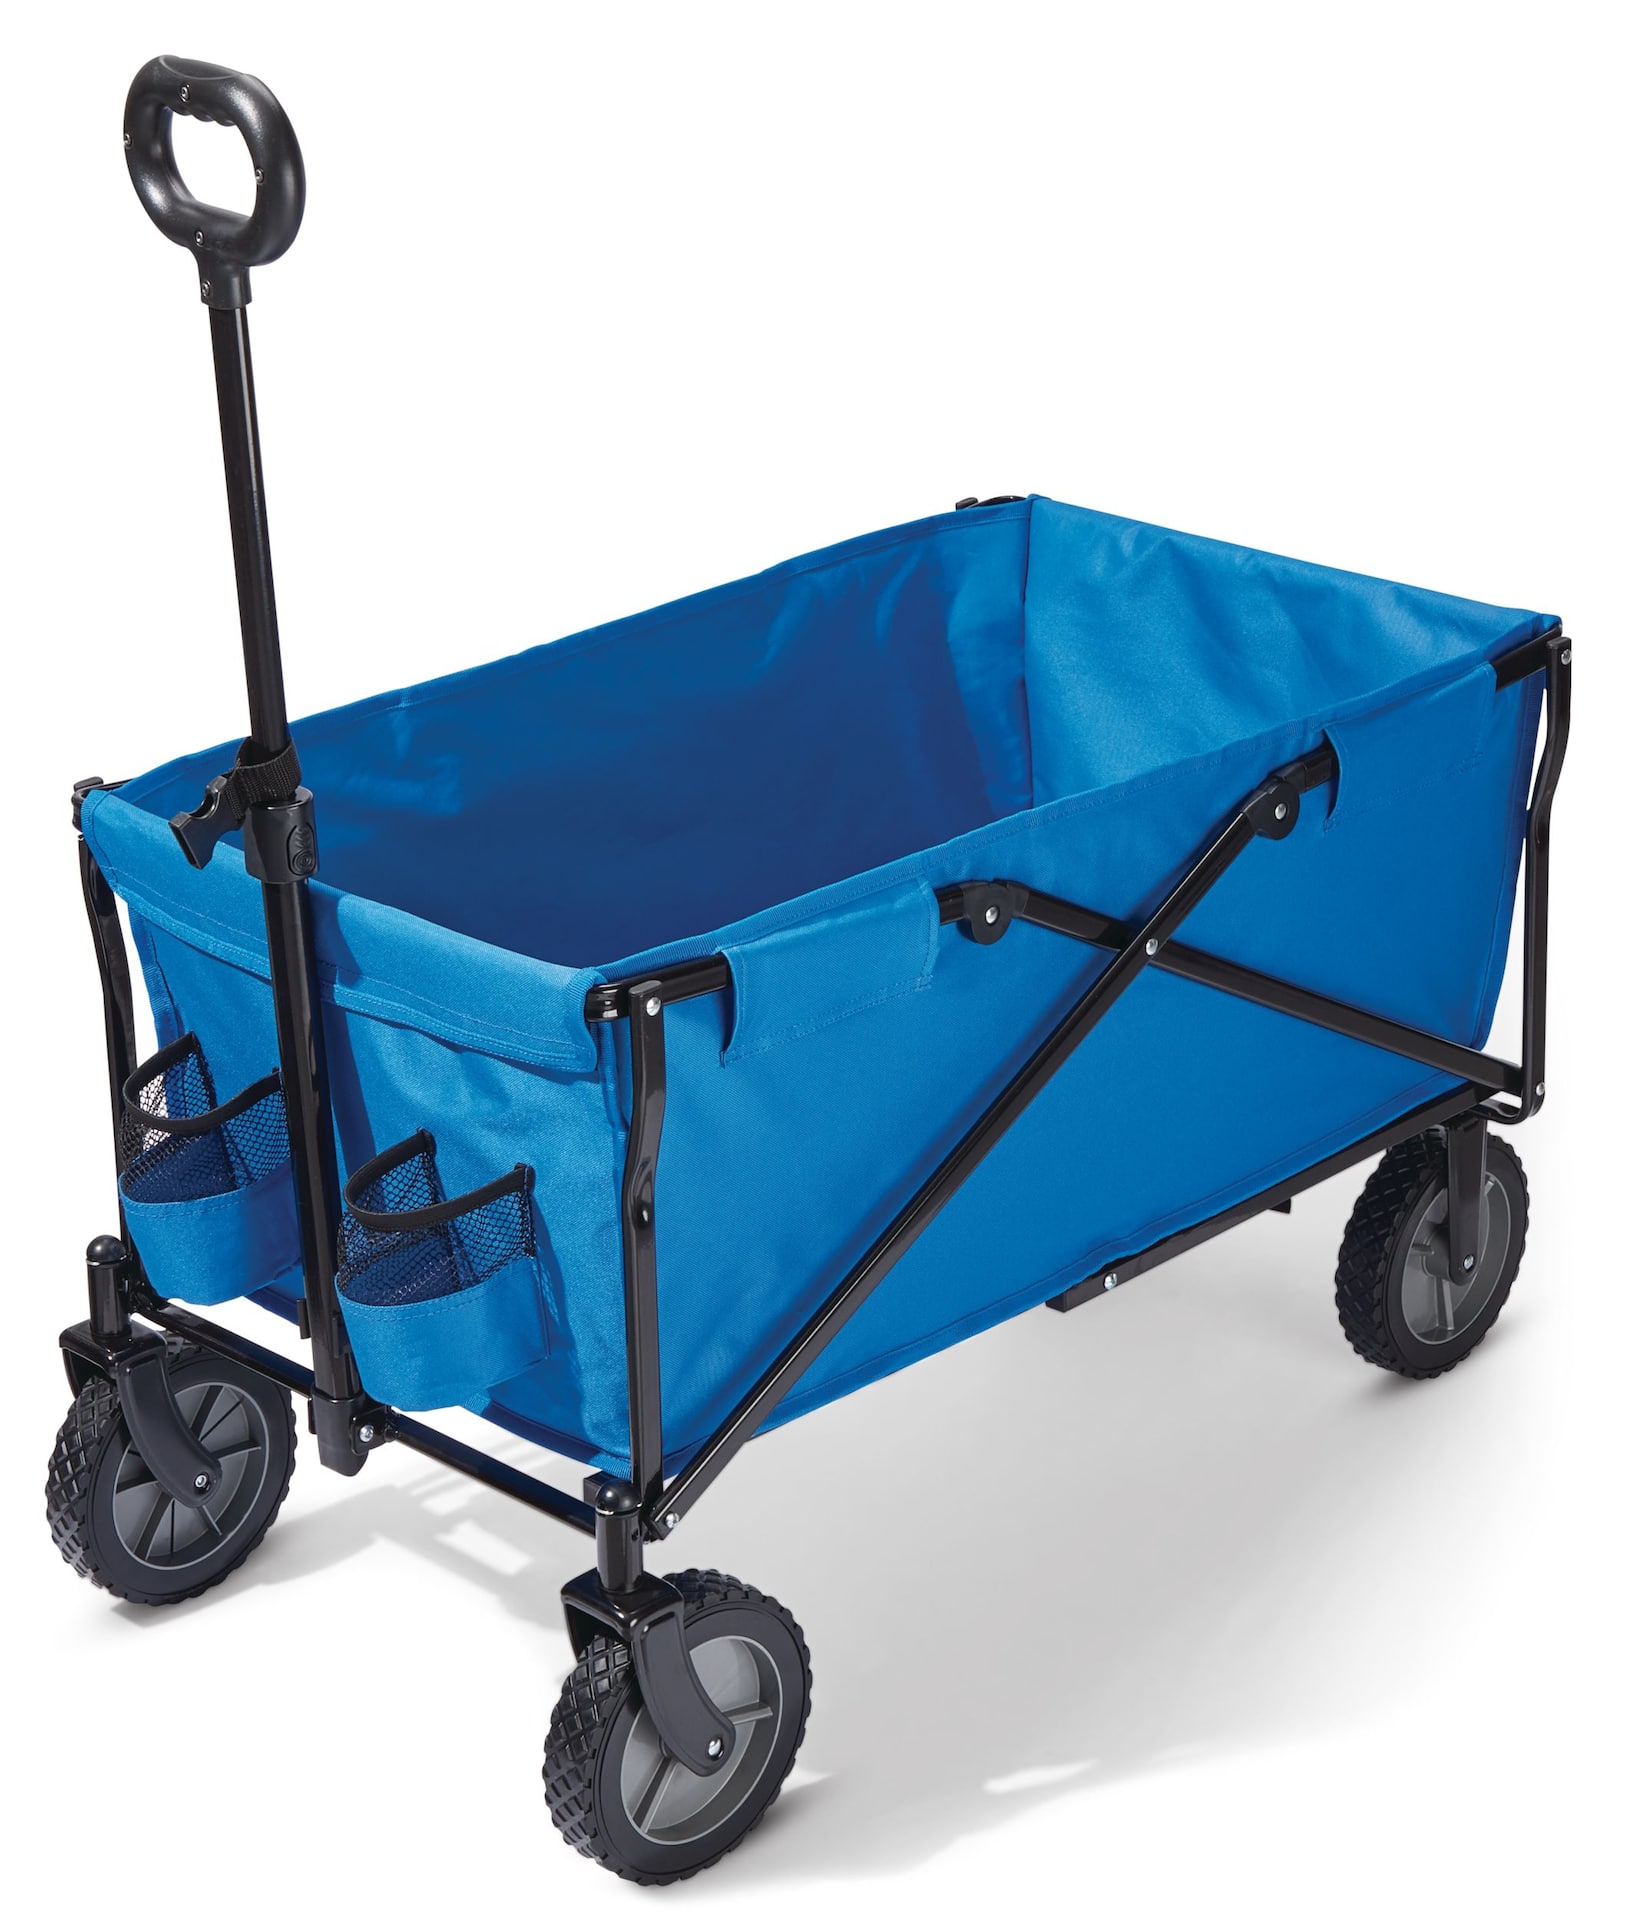  GDLF Fishing Cart Beach Carts Heavy Duty Foldable  Collapsible Wagon